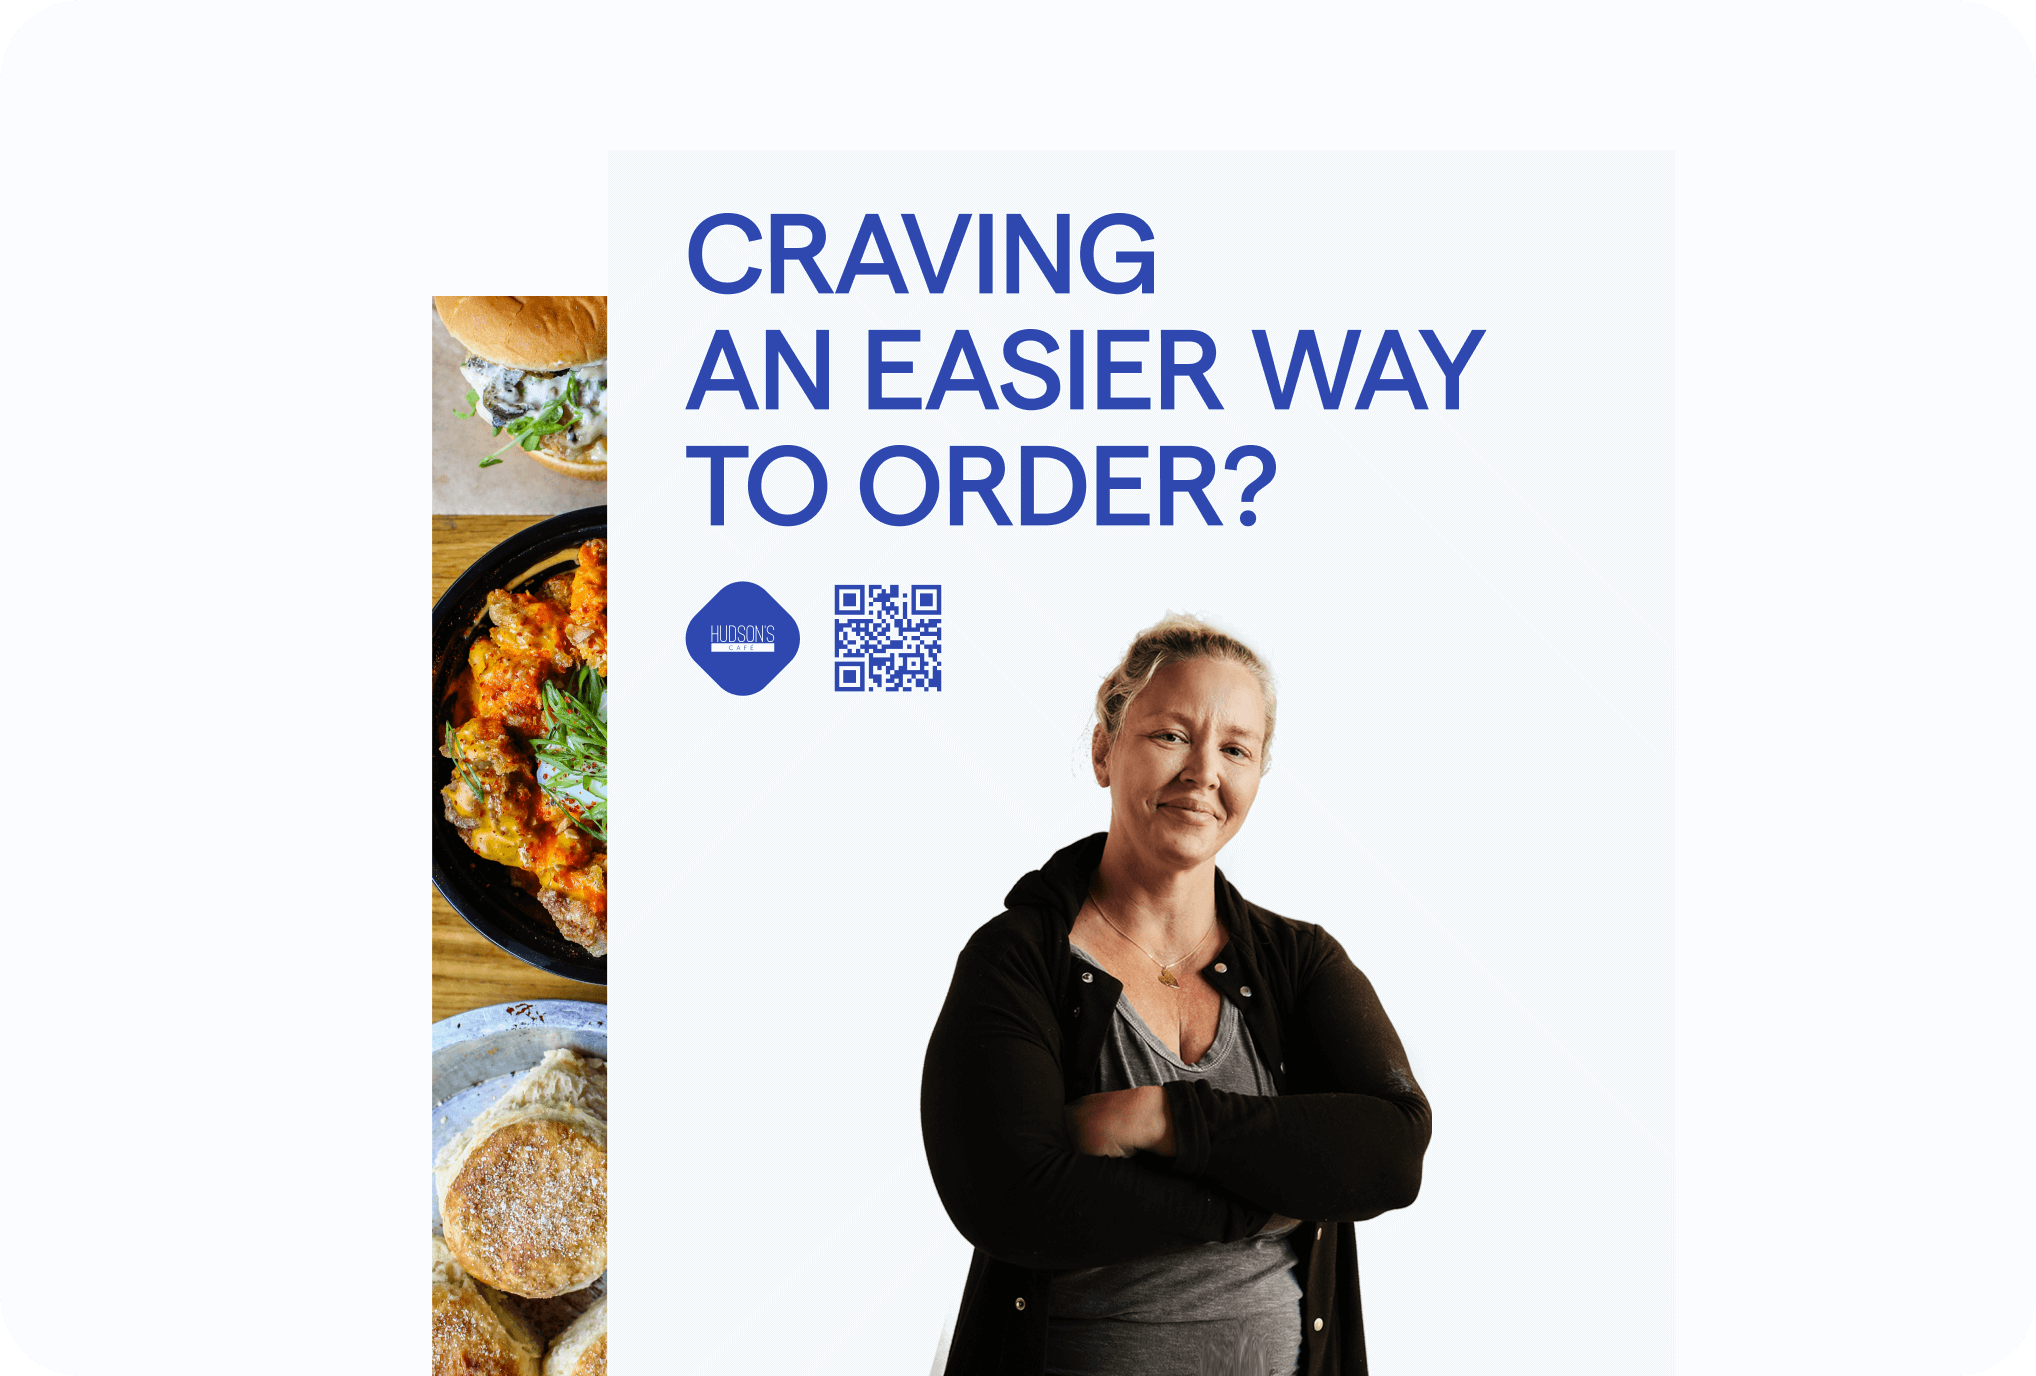 Craving an easier way to order?